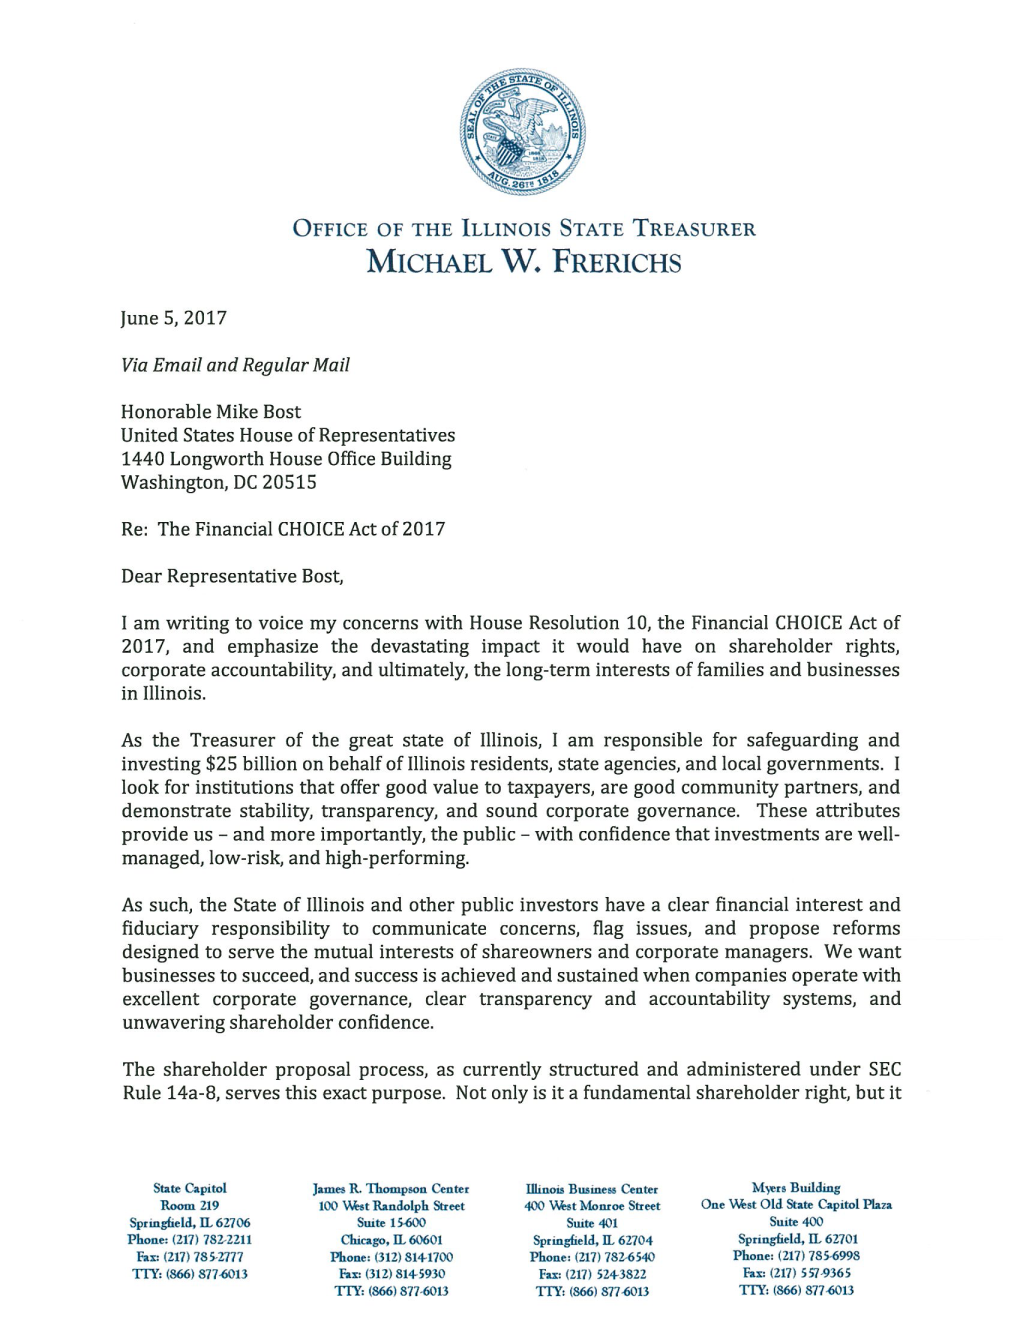 Letter to Illinois Congressional Delegation